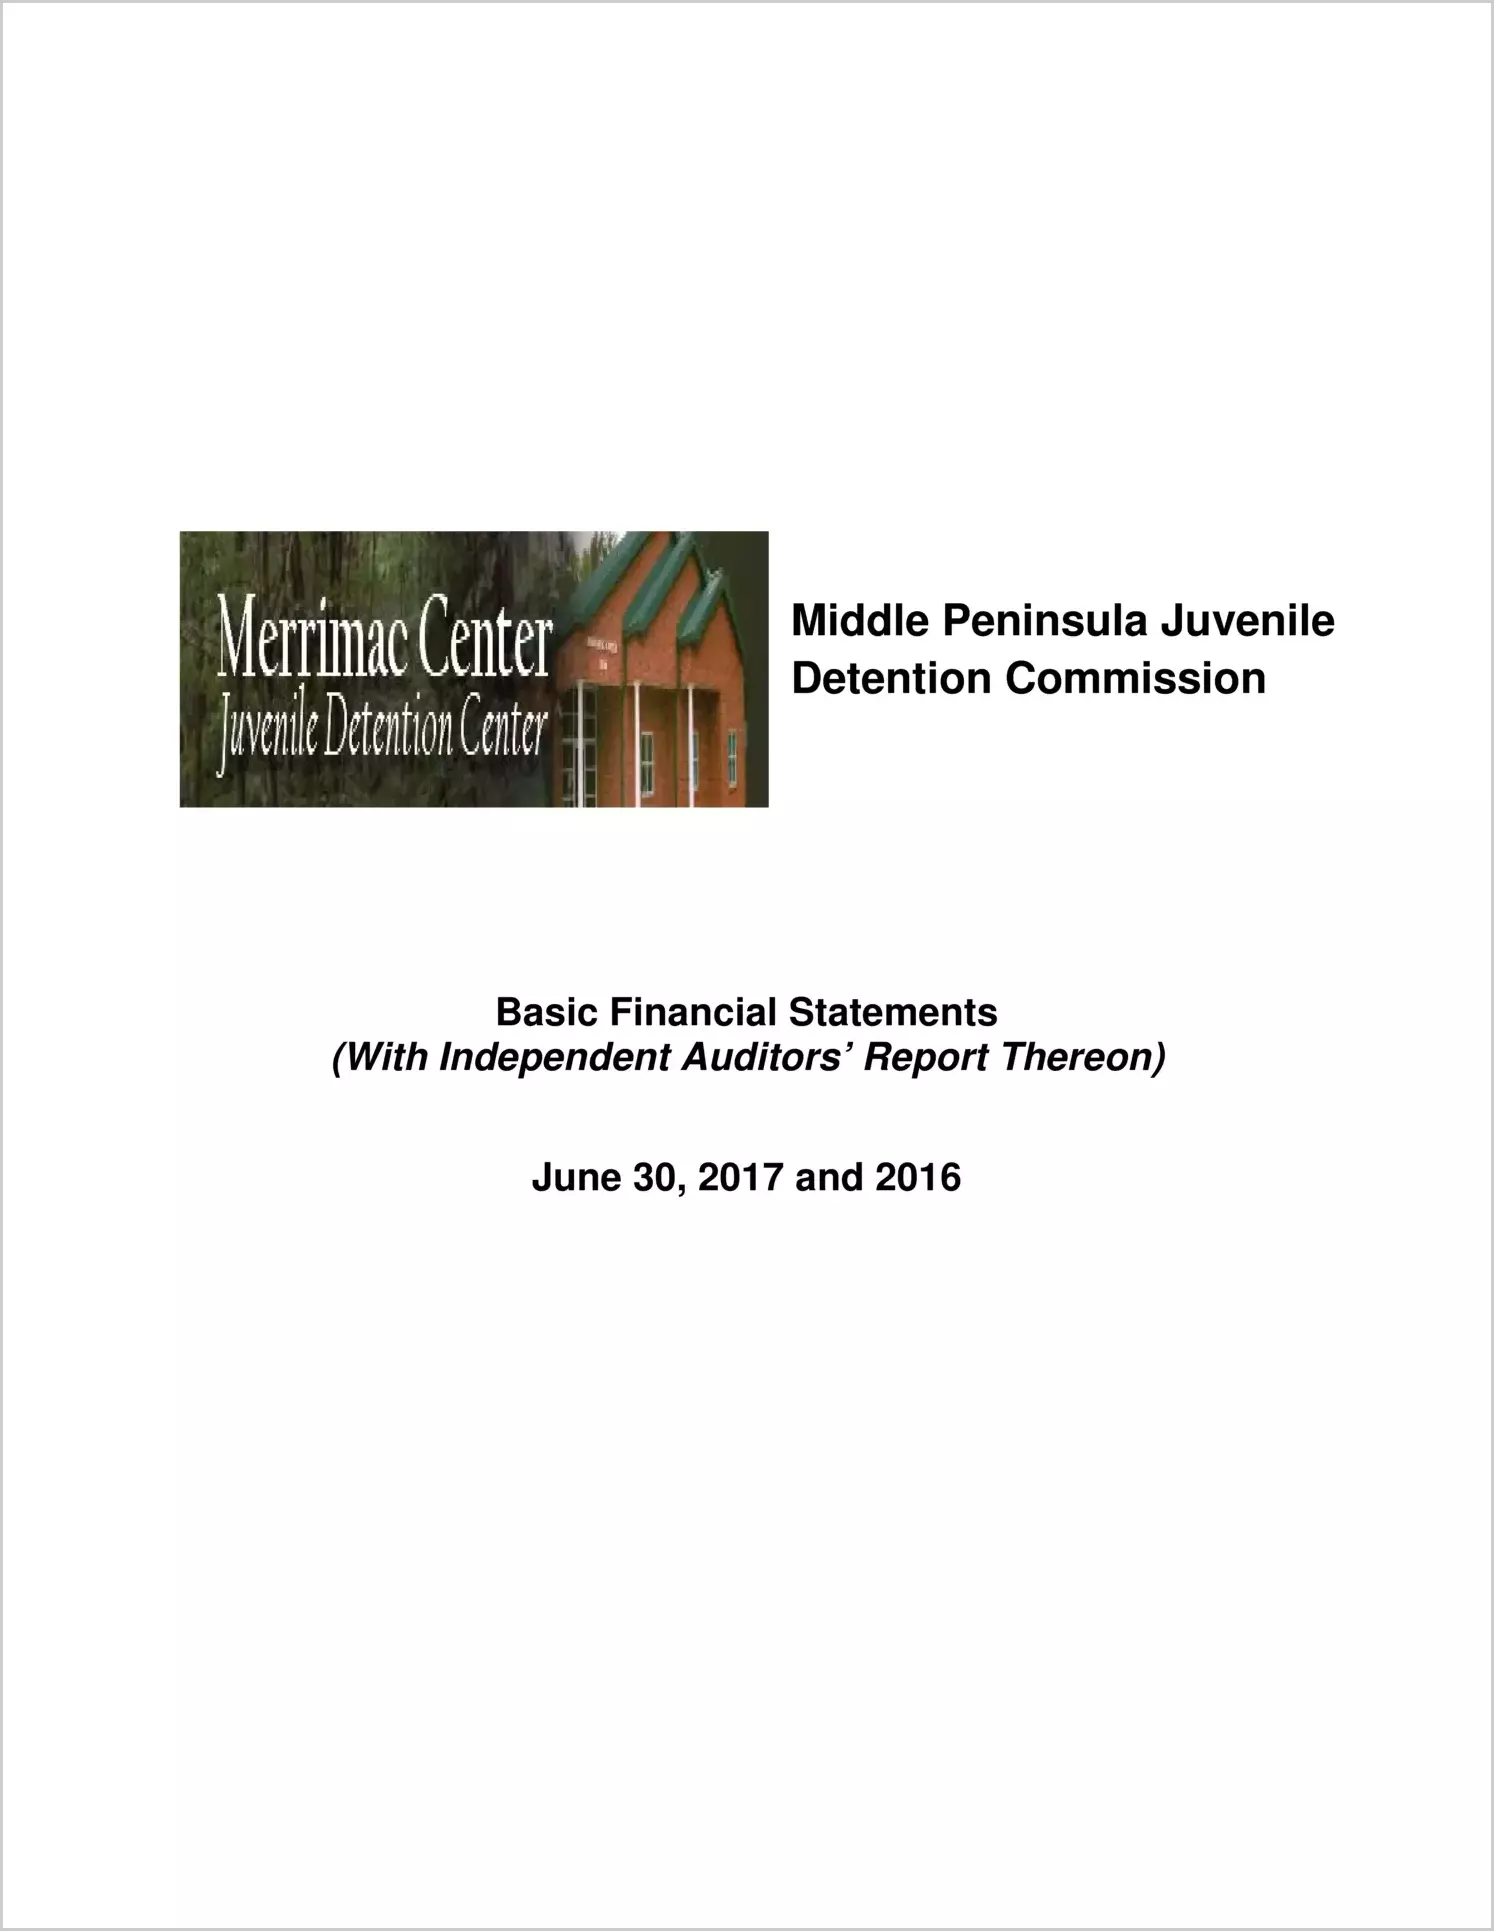 2017 ABC/Other Annual Financial Report  for Middle Peninsula Juvenile Detention Commission